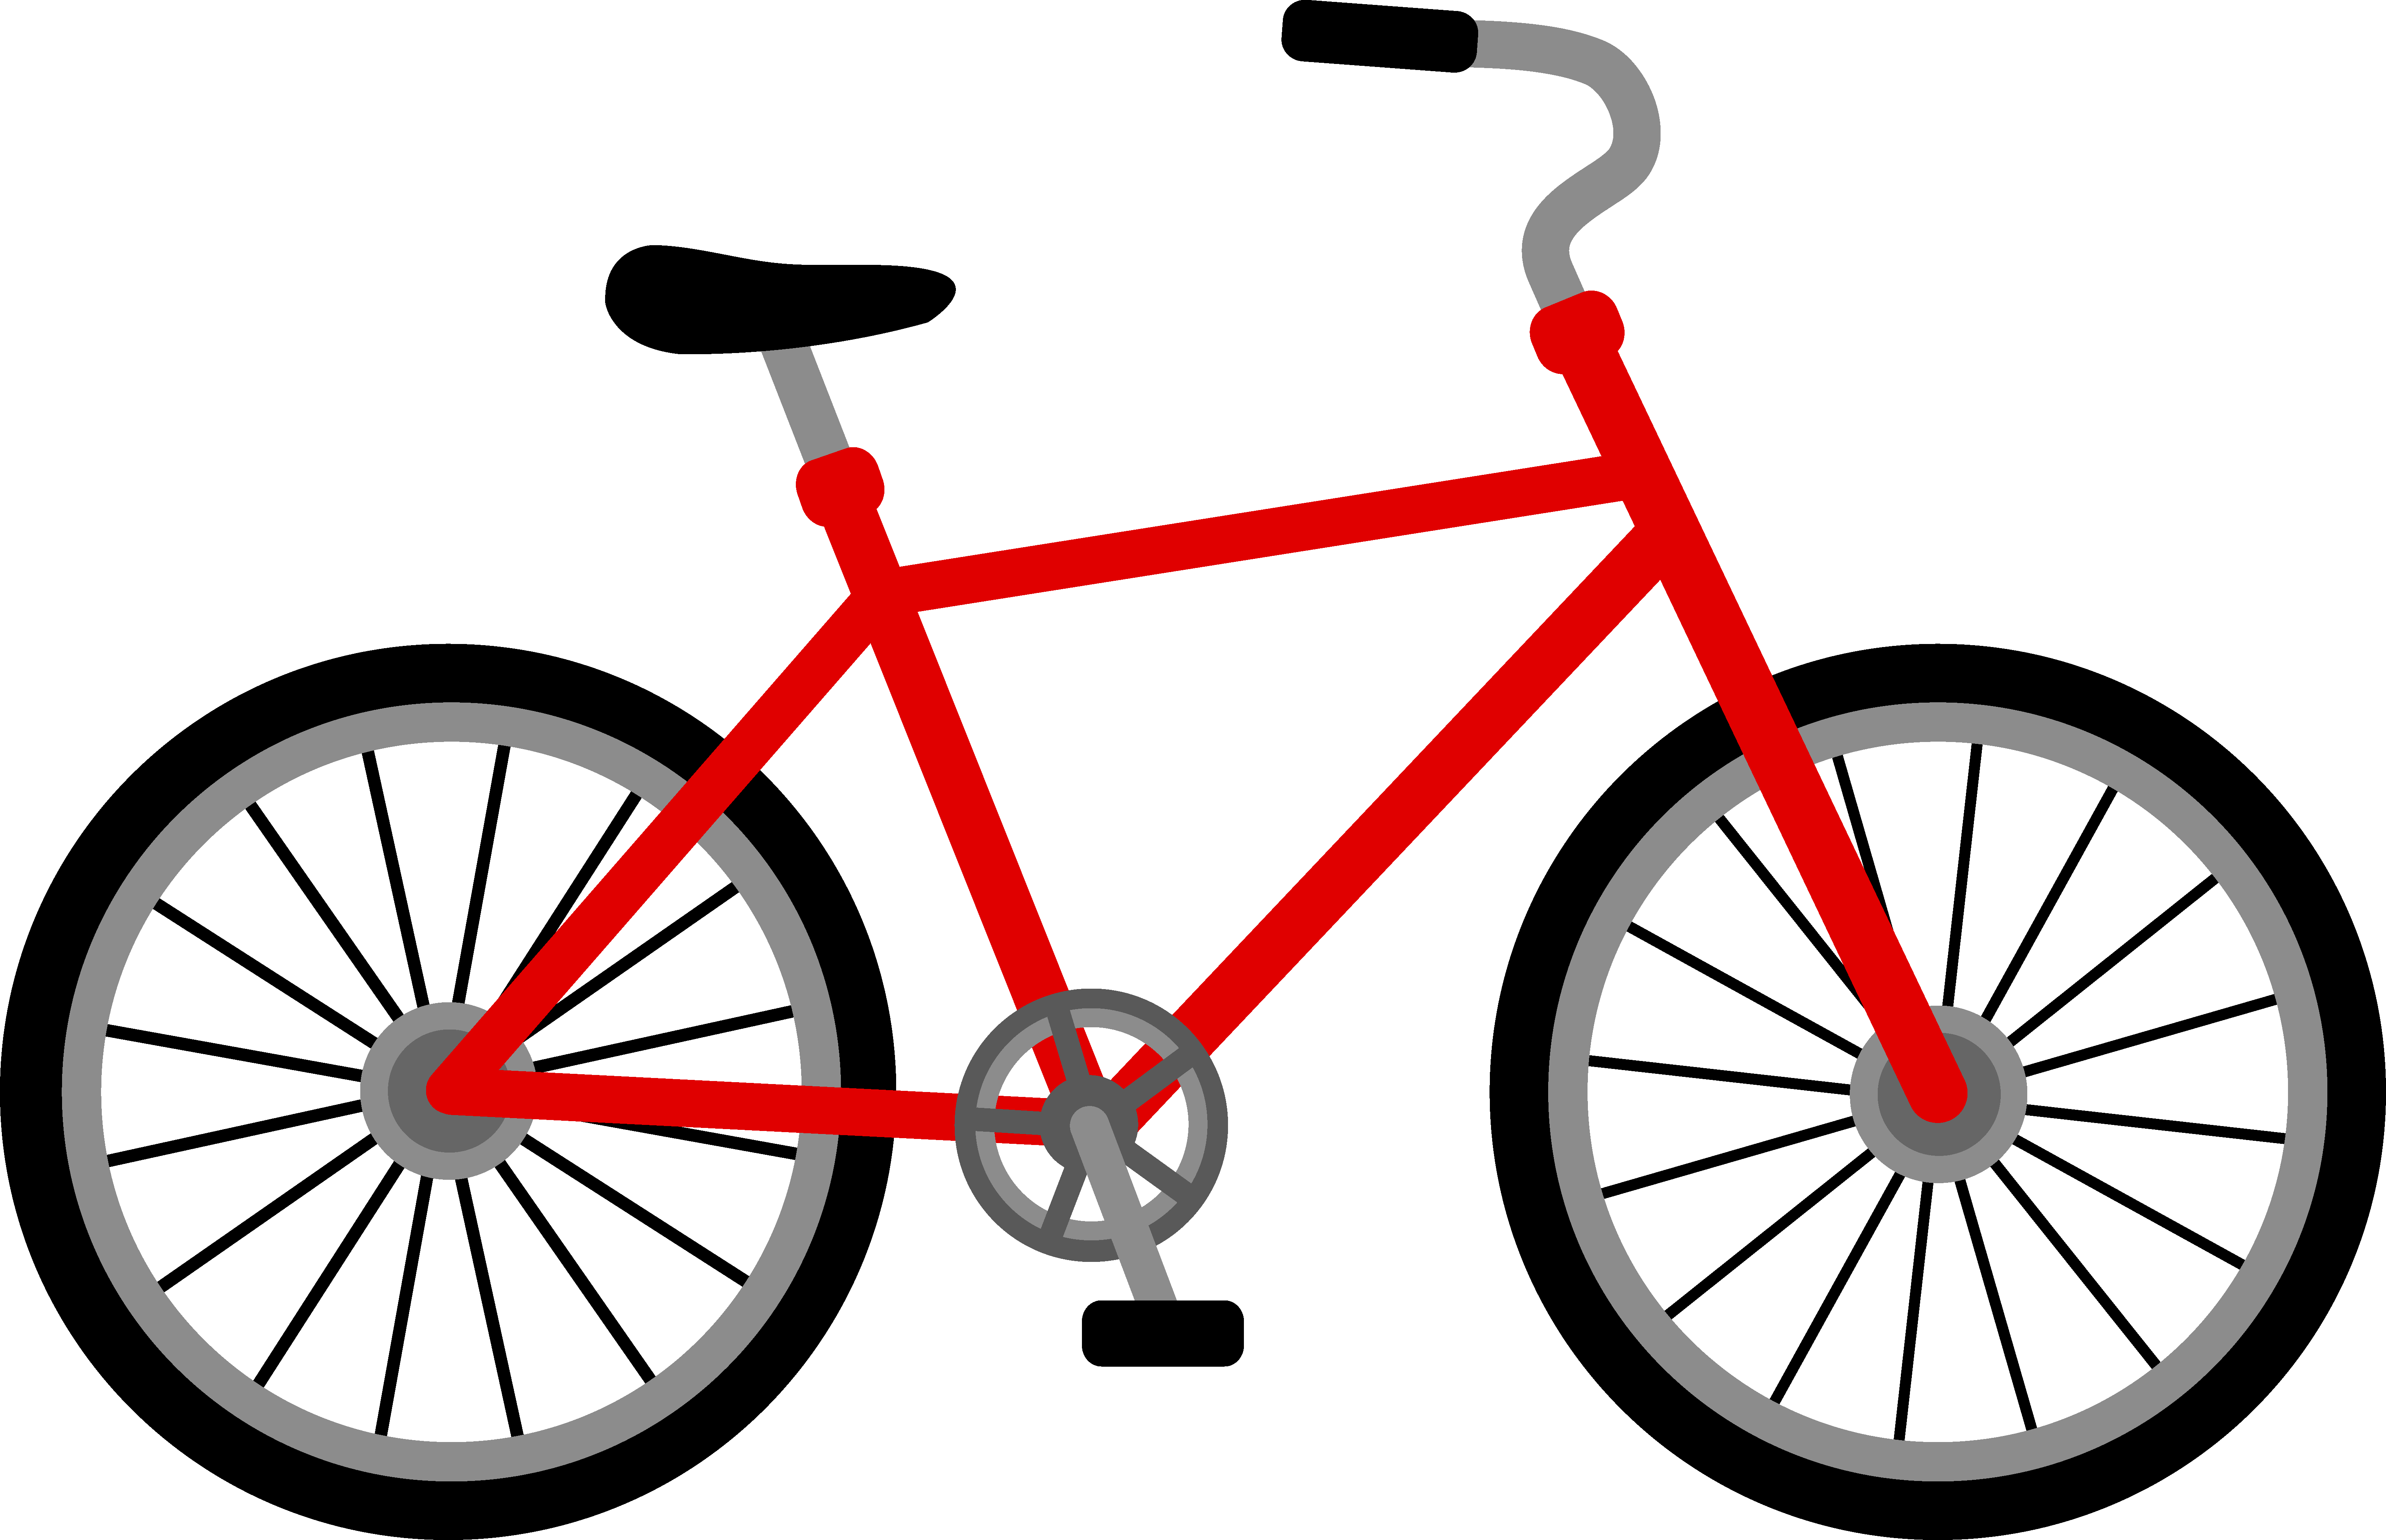 Cartoon Images Of Bicycle - ClipArt Best